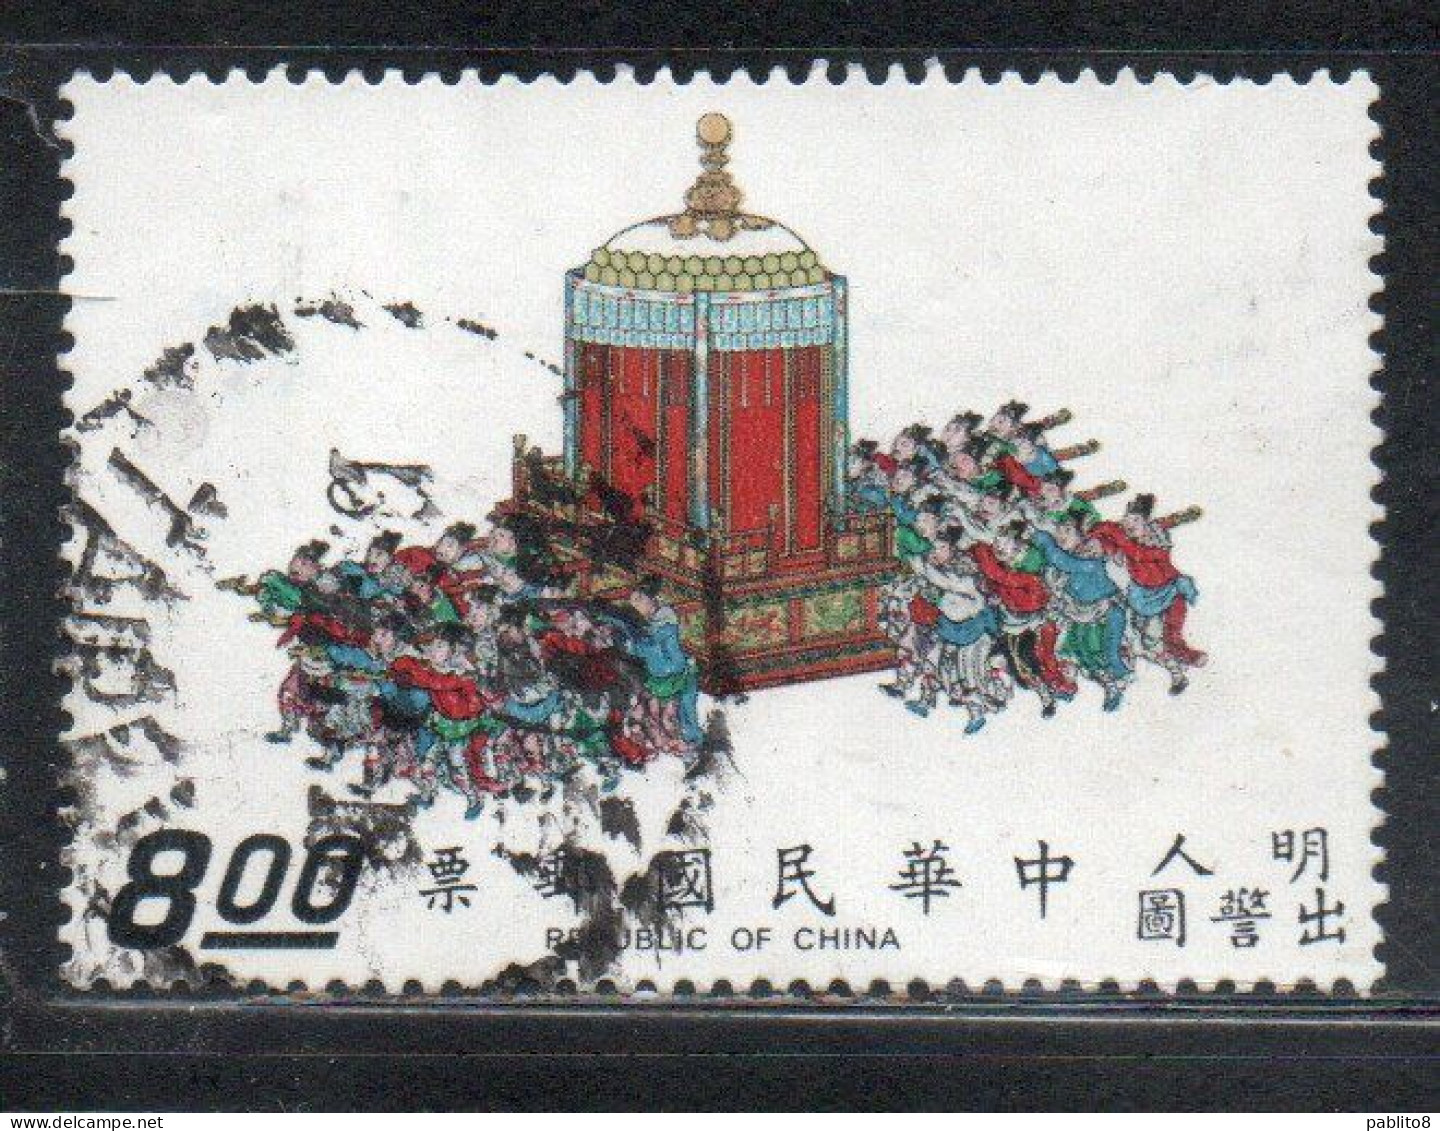 CHINA REPUBLIC CINA TAIWAN FORMOSA 1972 SCROLLS DEPICTING EMPEROR SHIH-TSUNG'S SEDAN CHAIR CARRIED BY 28 ME8$ USED USATO - Usati